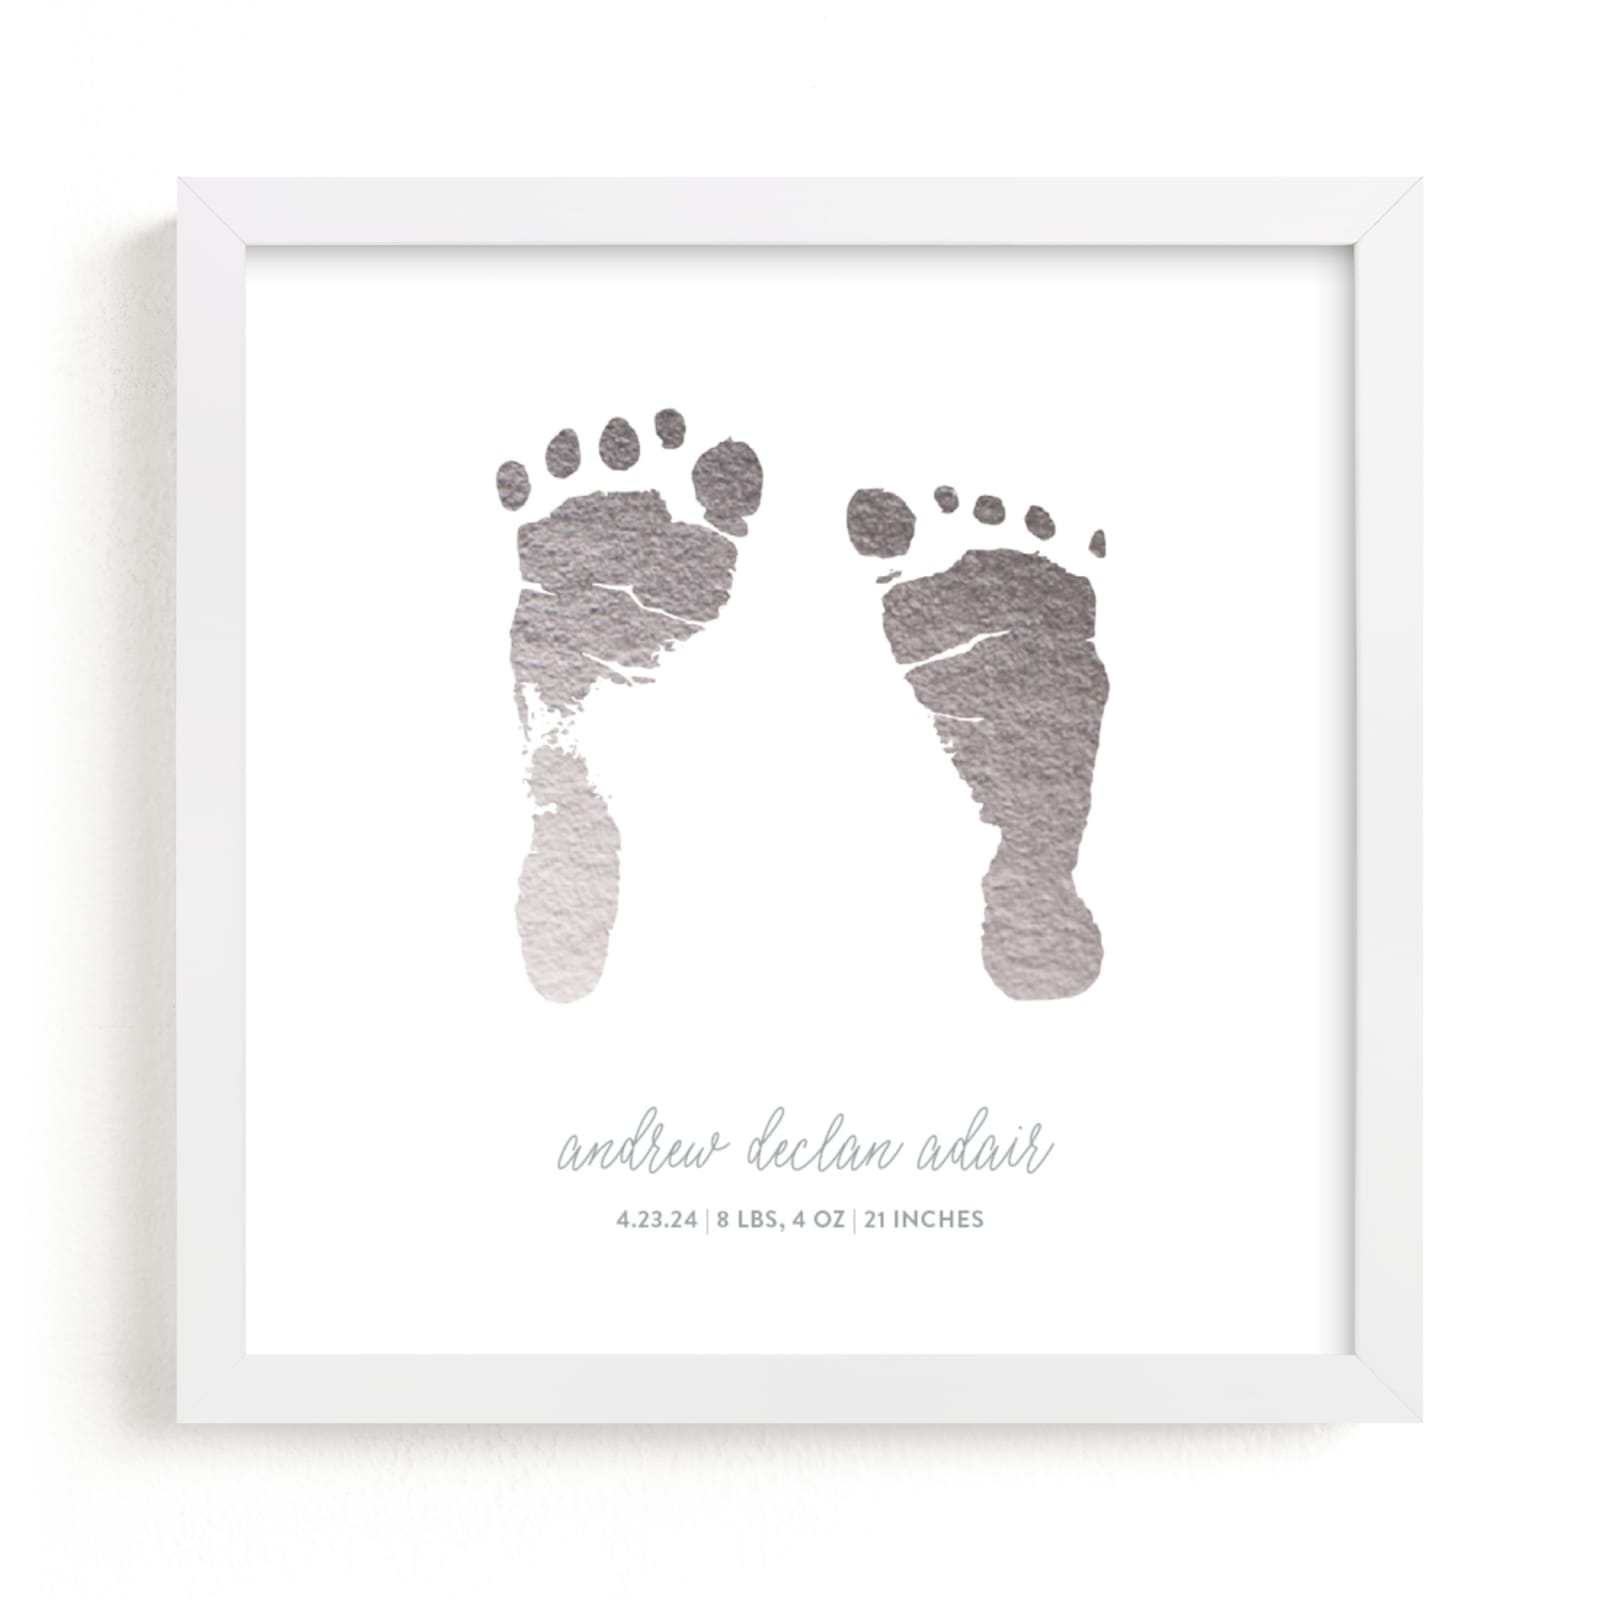 This is a silver photos to art by Minted Custom called Custom Footprints Foil Art.